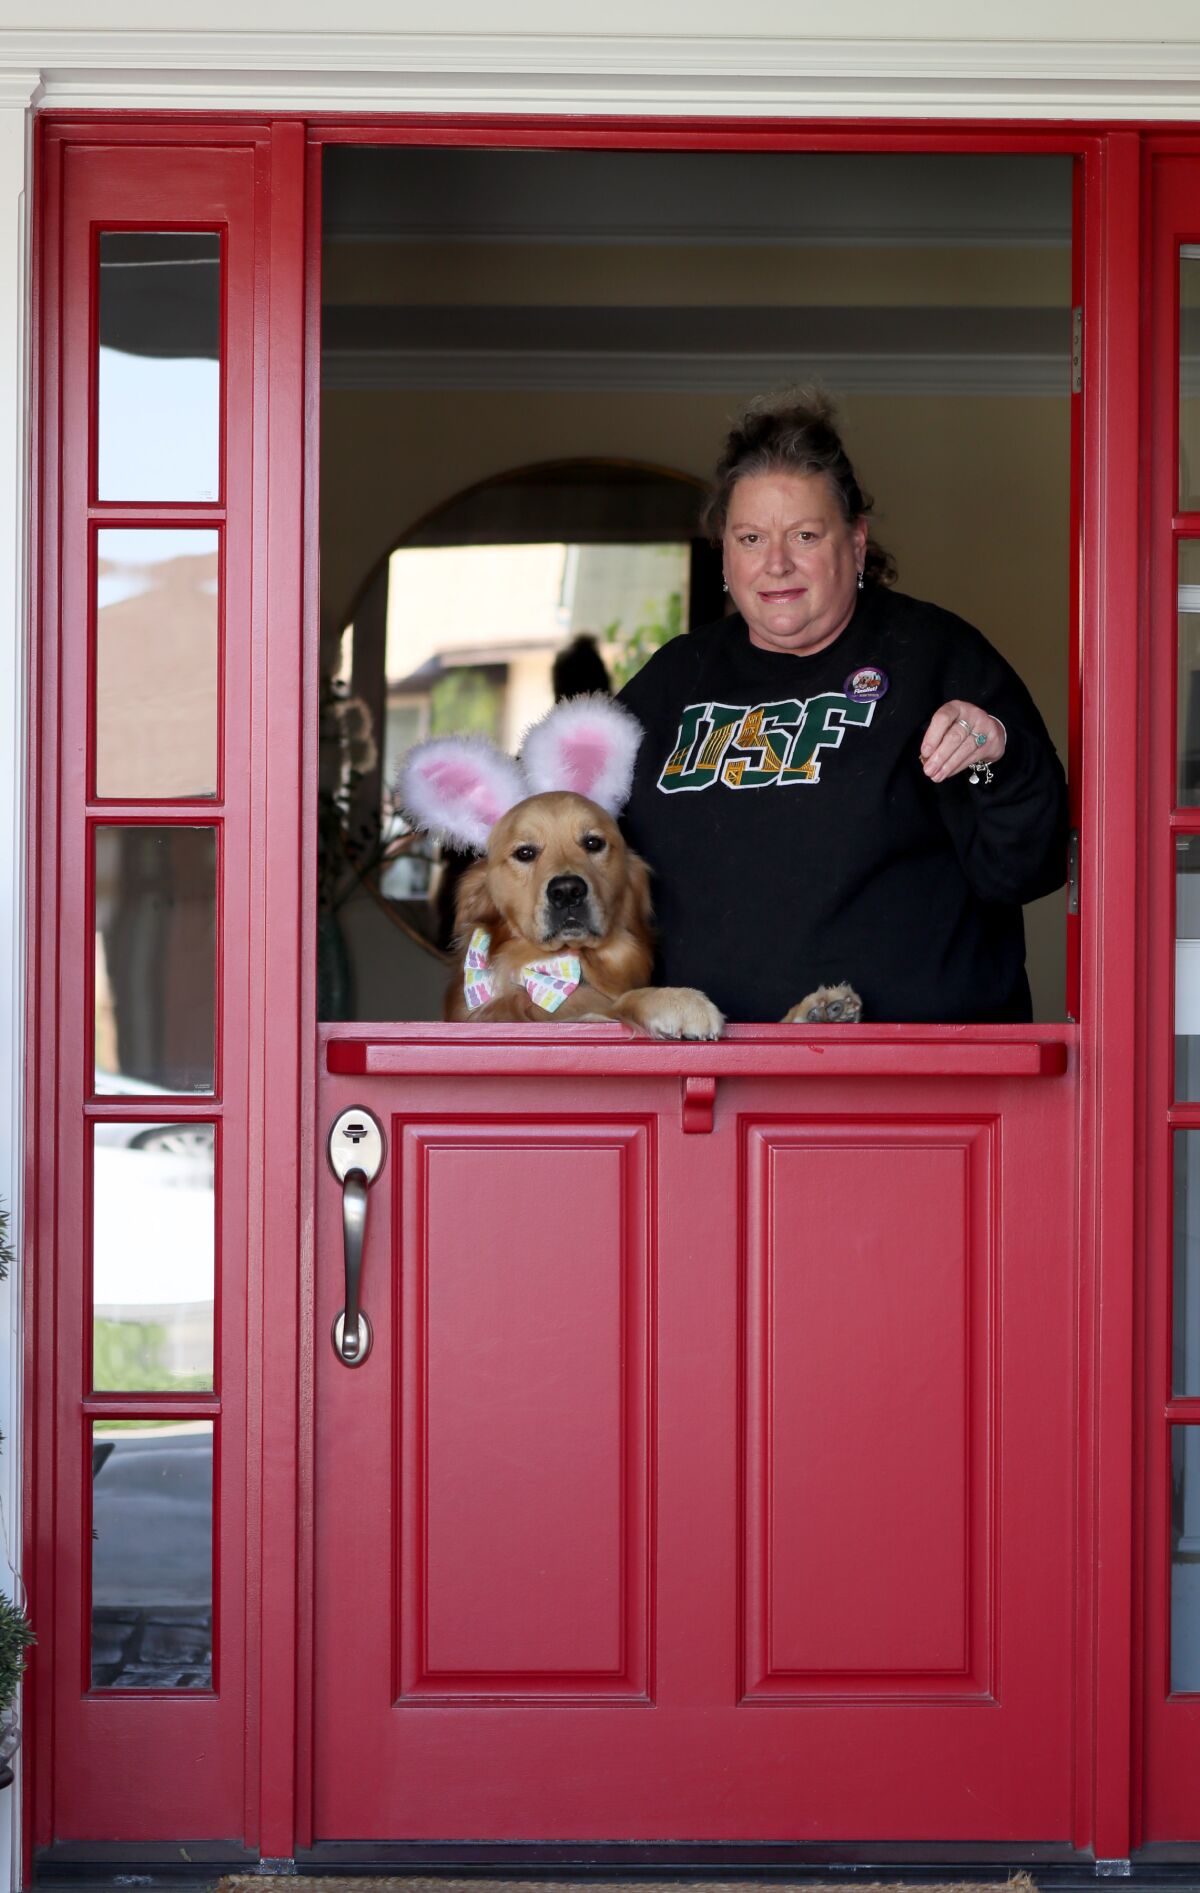 A dog in bunny ears and a woman stand behind a half-door.